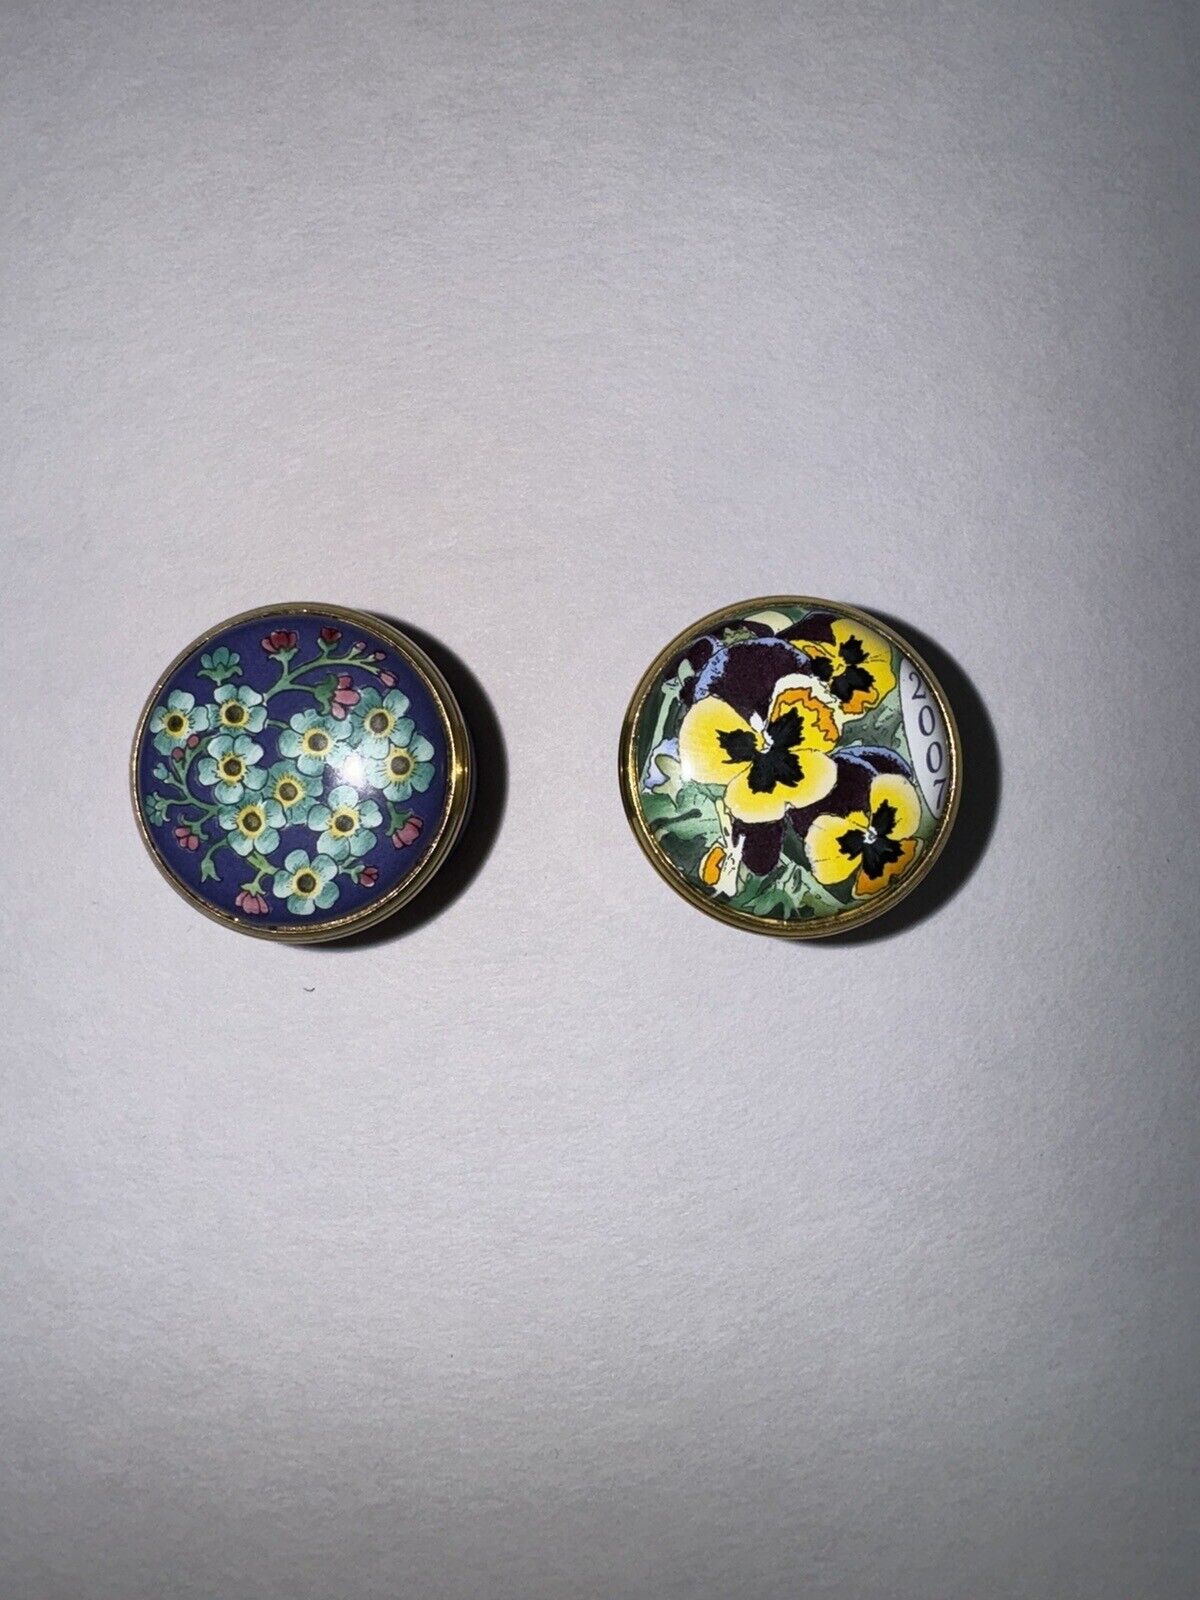 (2) Halcyon Days Enamels Trinket Boxes - 2007 Collection & Forget-Me-Not Florals